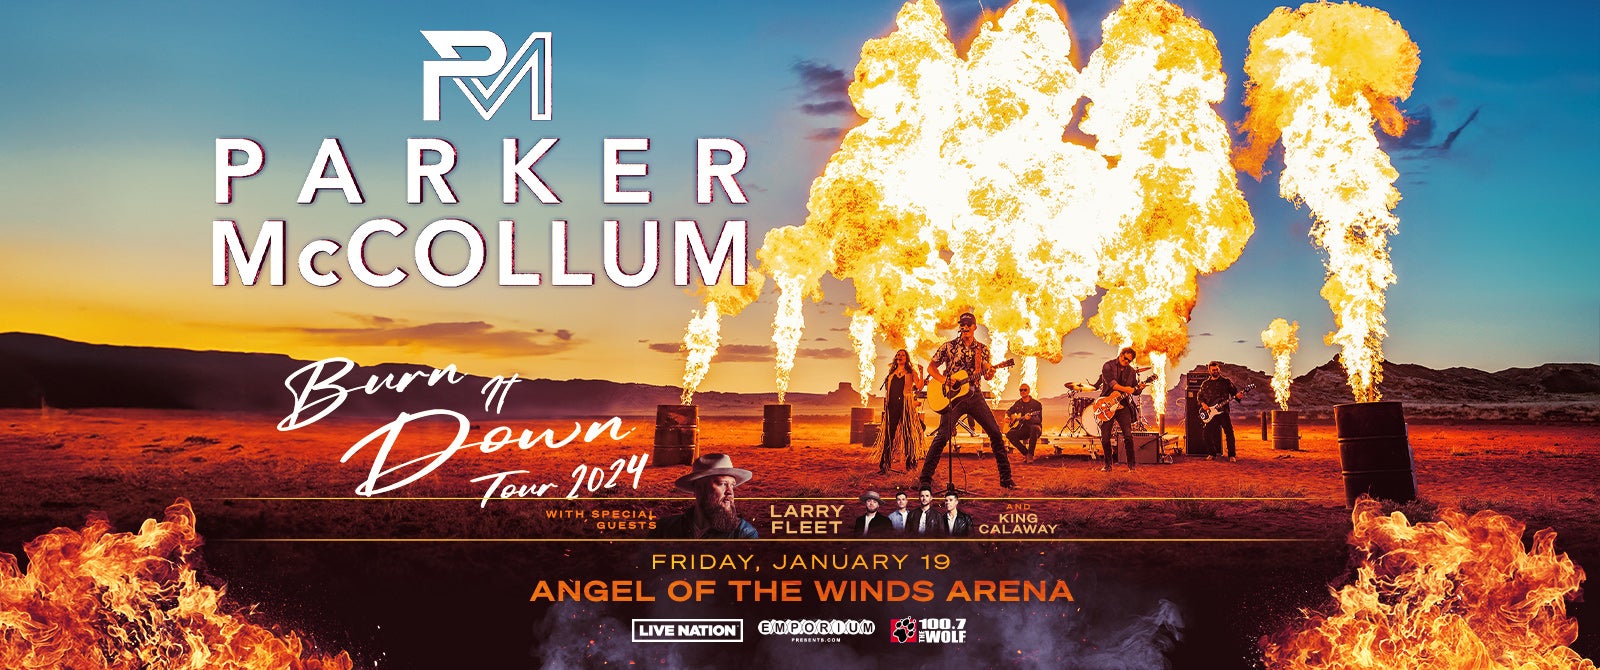 Parker McCollum  Angel of the Winds Arena